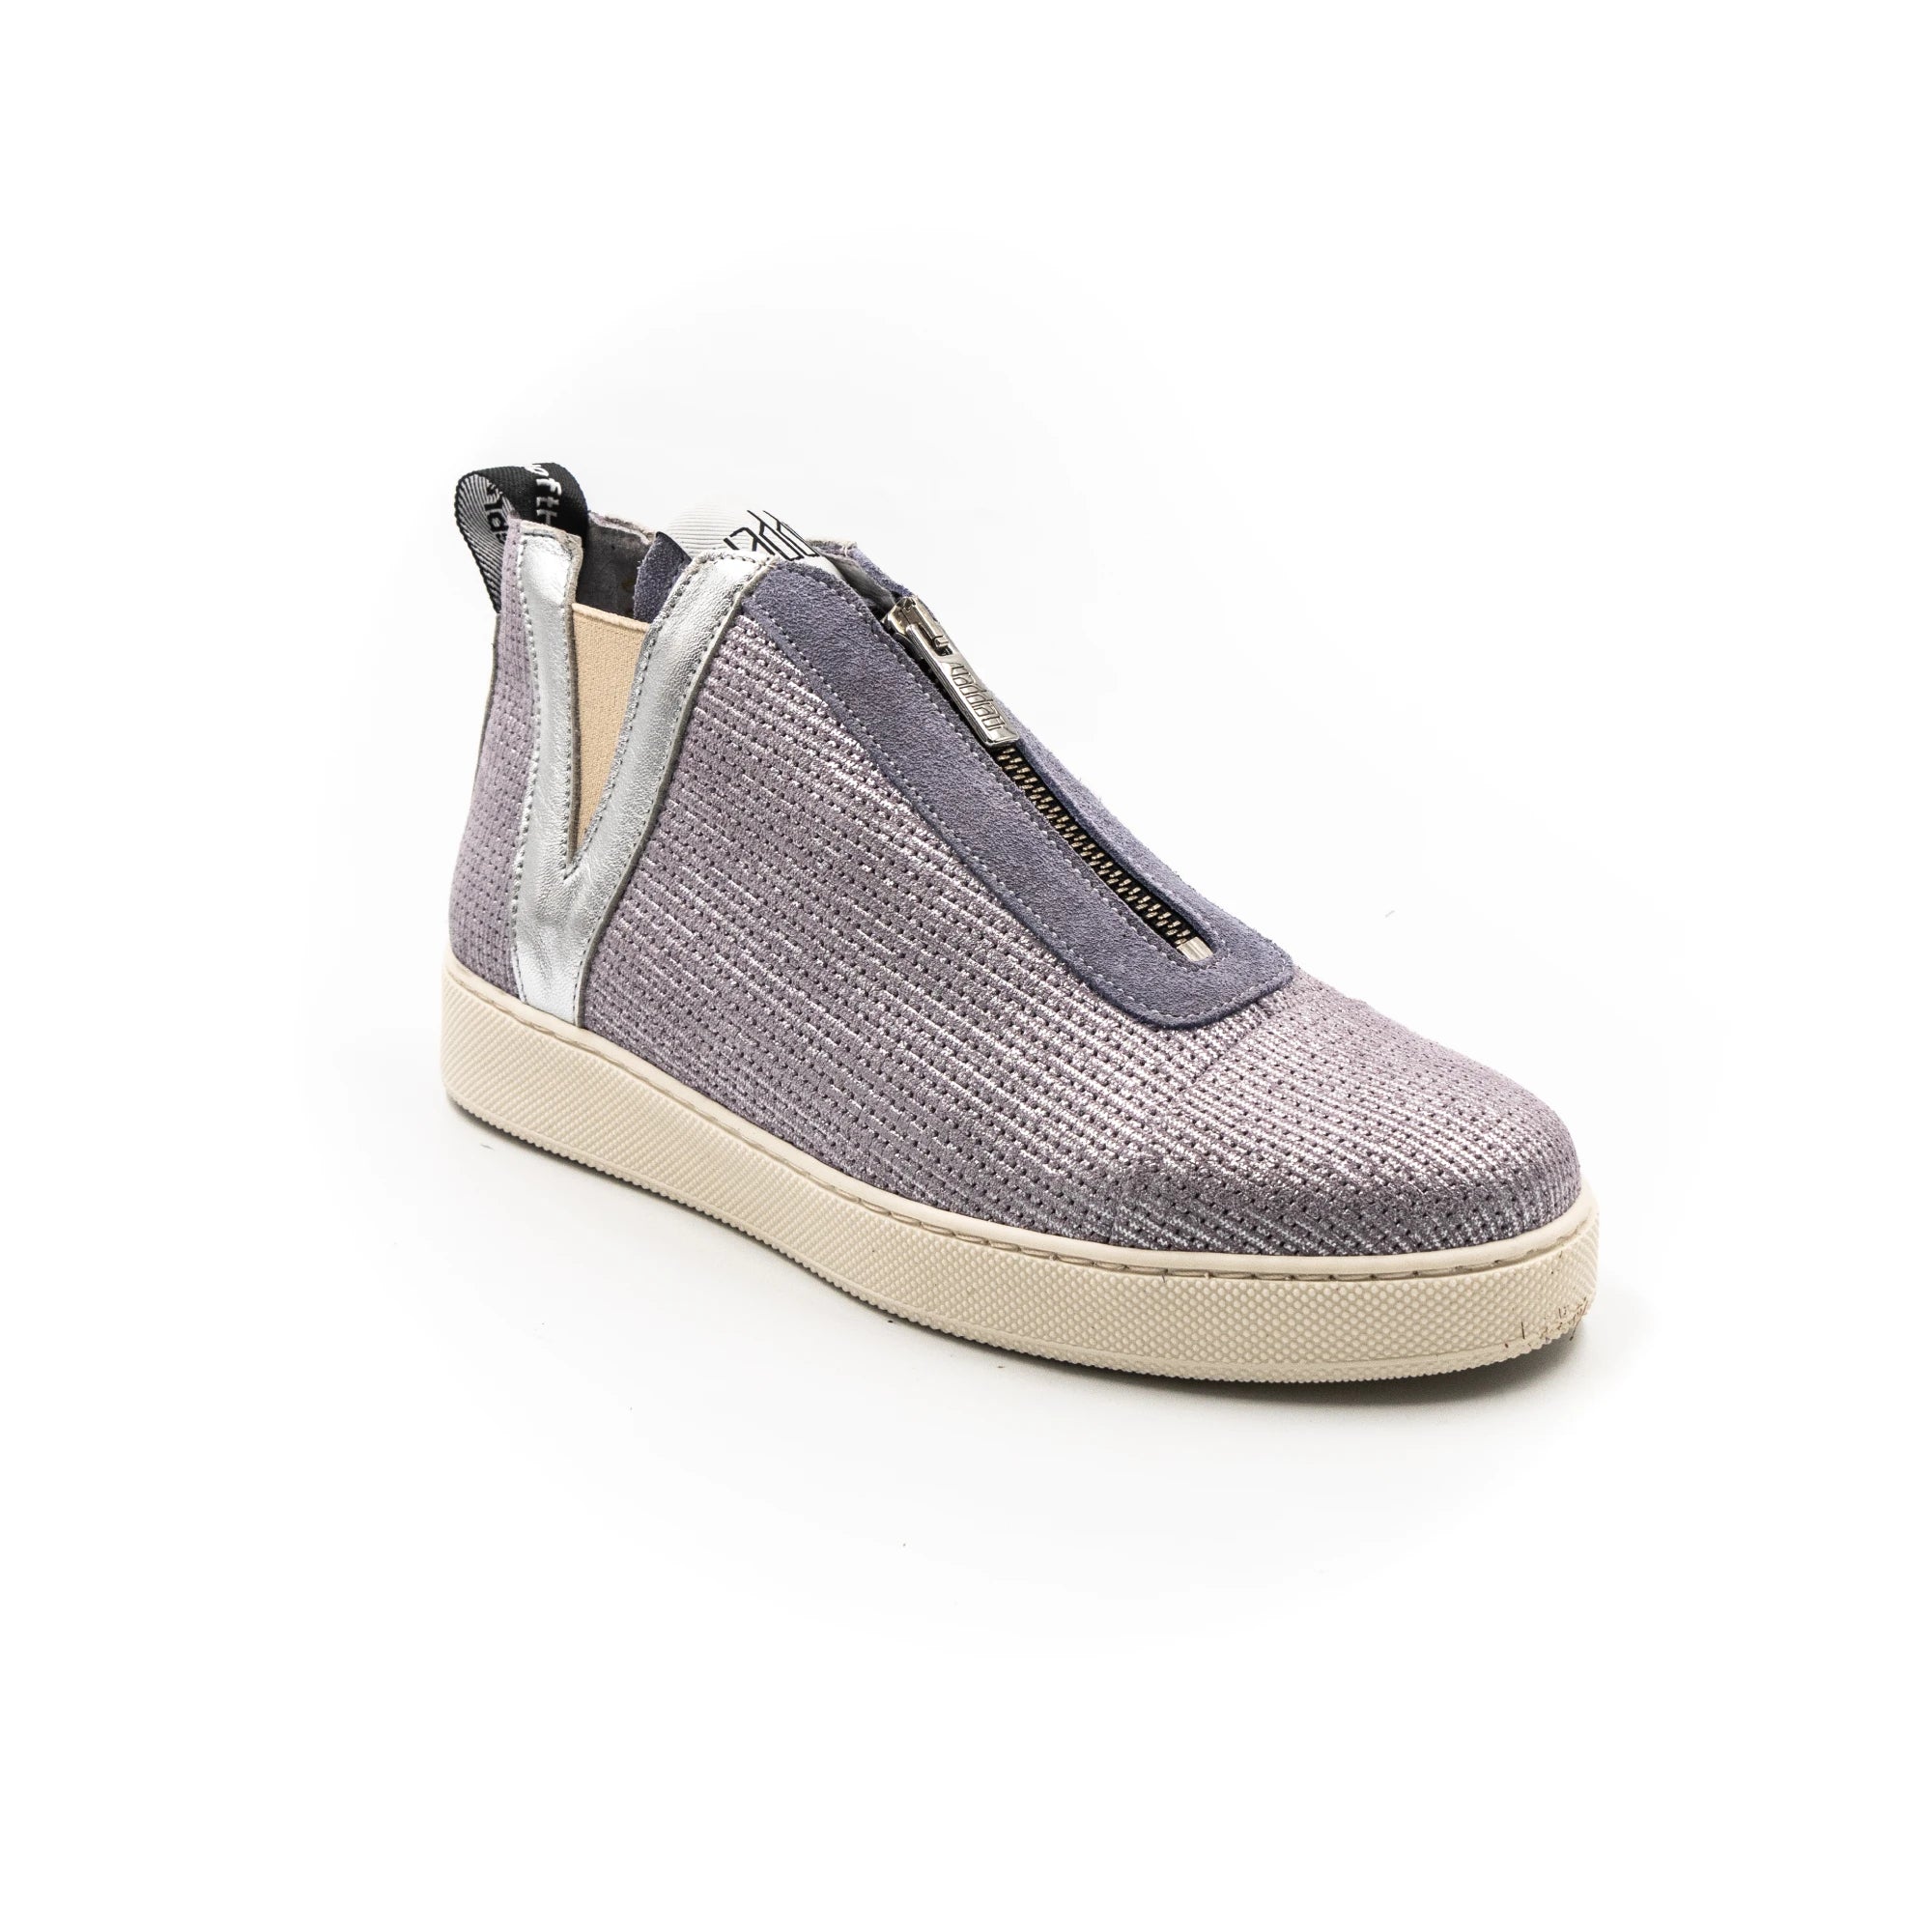 Sneakers with zipper, in lilac.